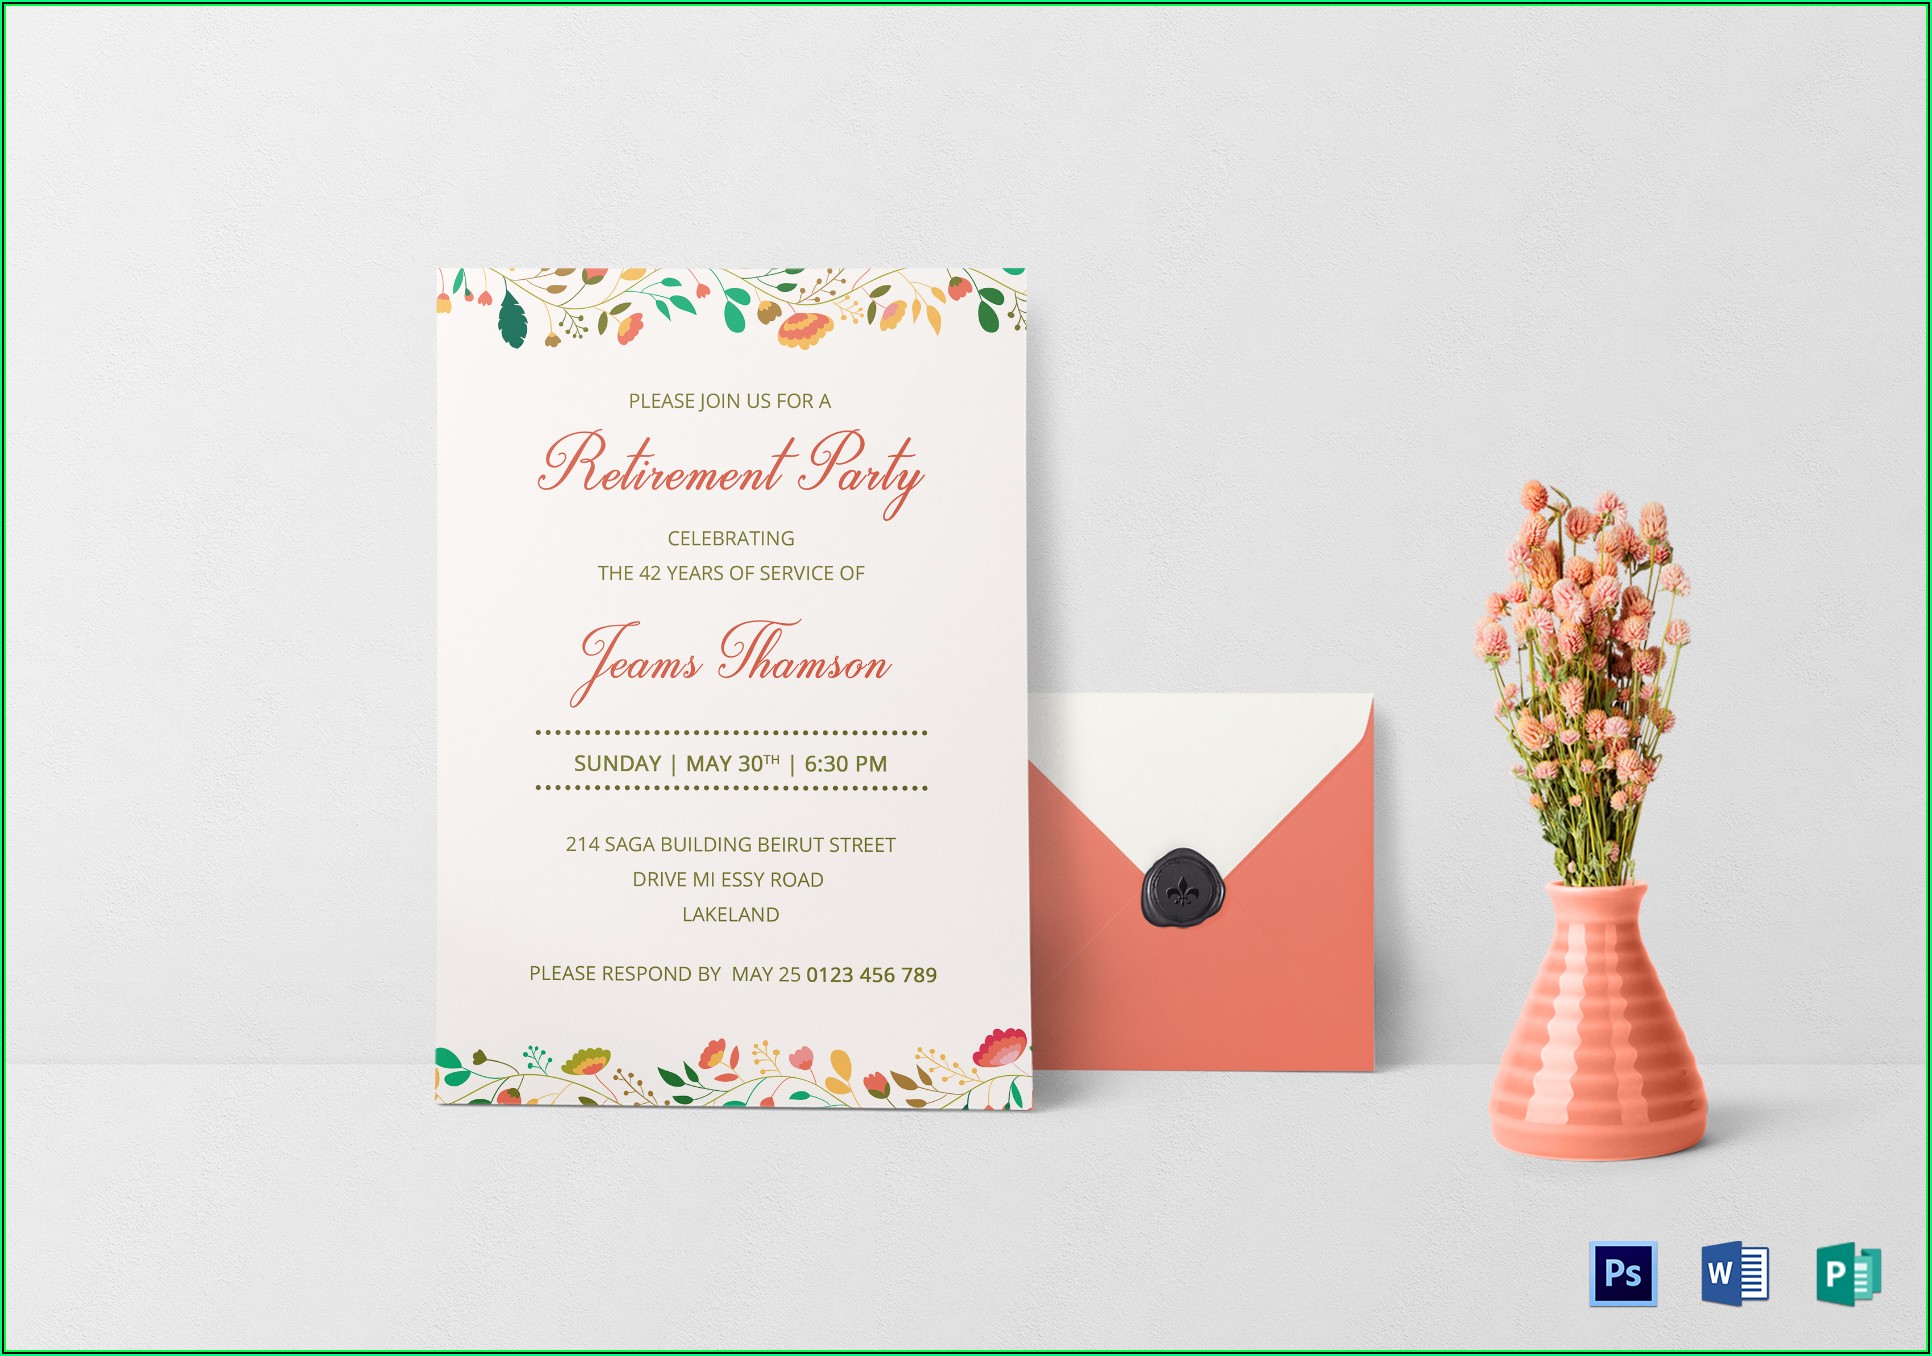 Retirement Party Template Publisher